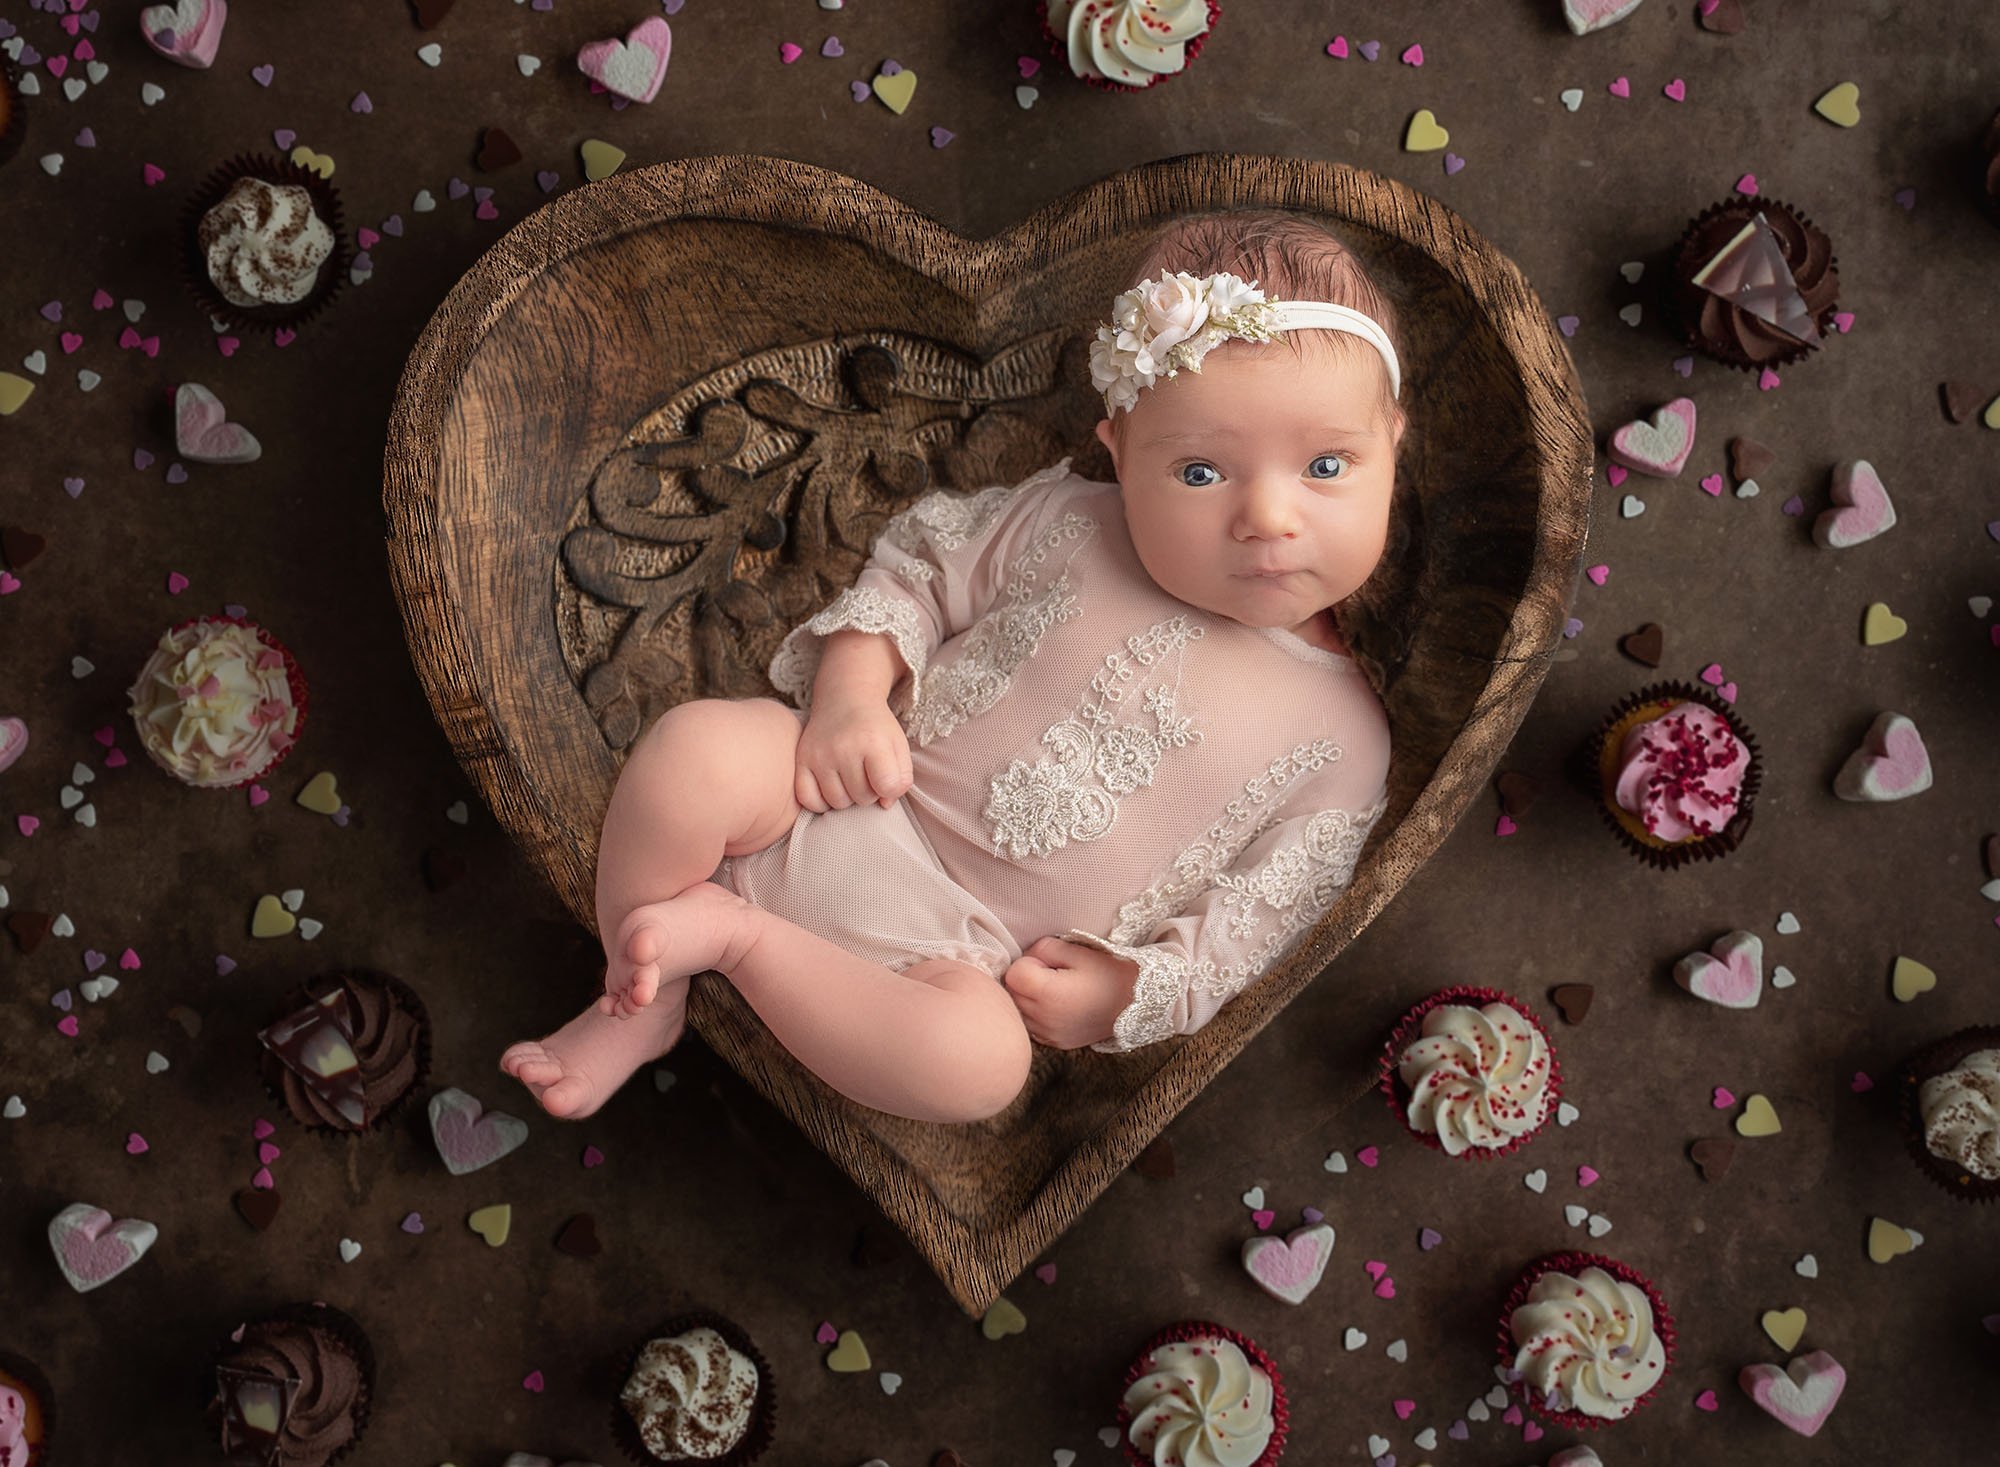 best time to take newborn photos 5 week old baby girl lying in a heart shaped bowl surrounded by cupcakes looking at the camera best time to take newborn photos